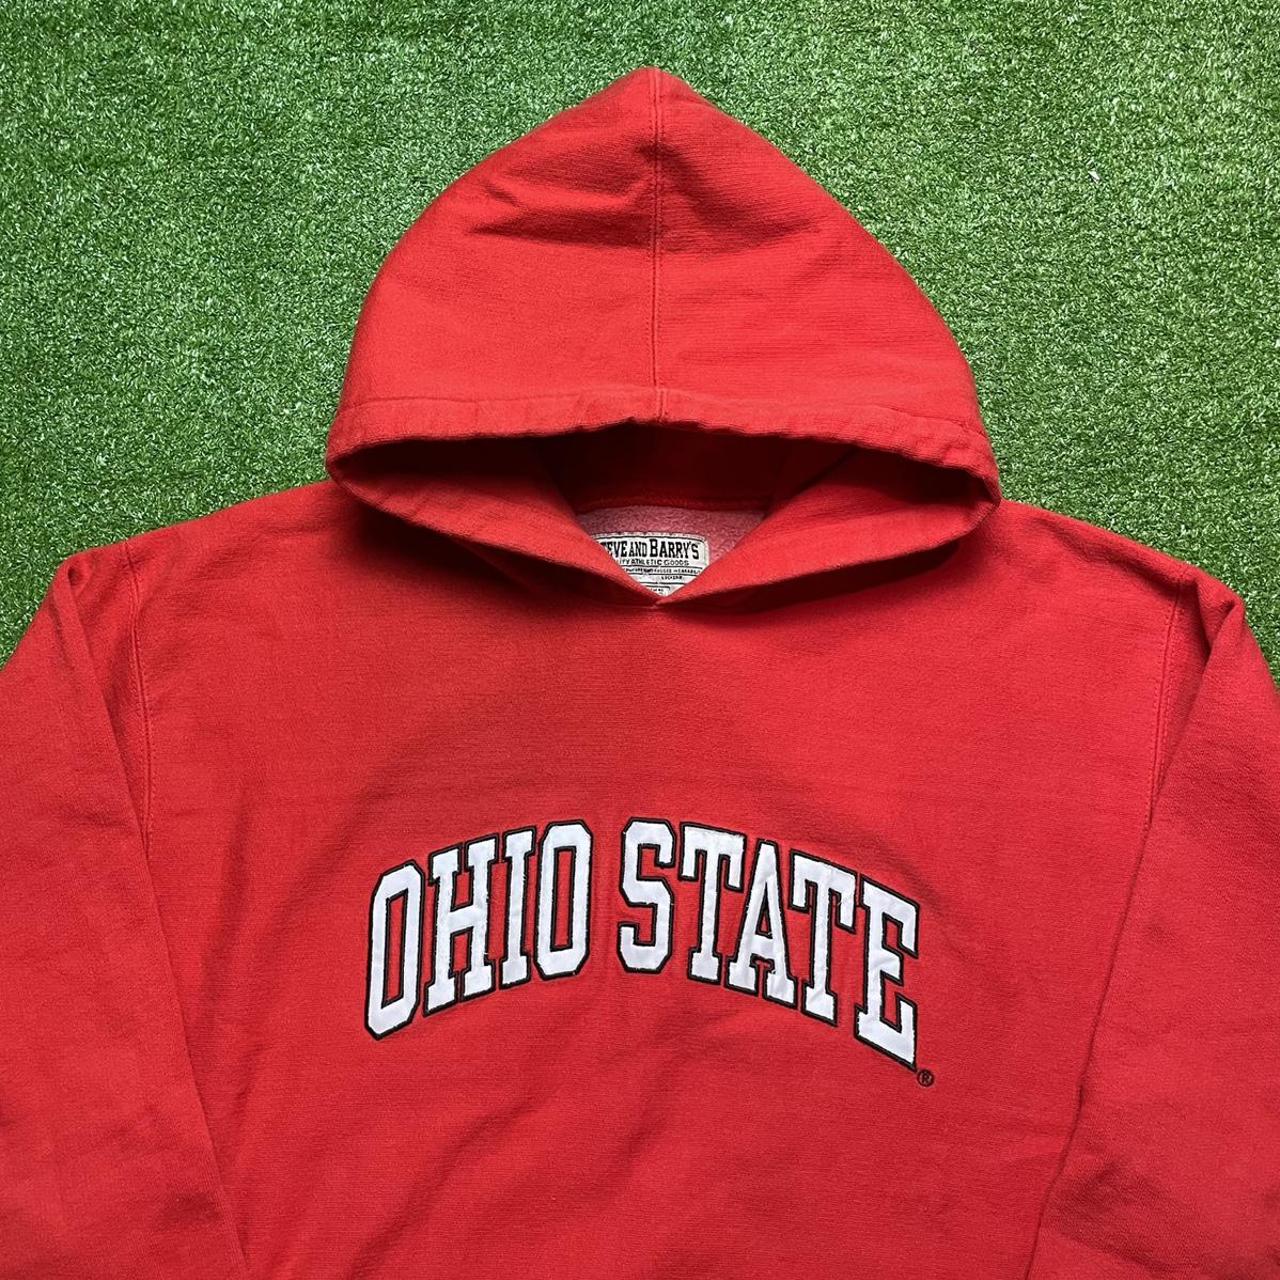 Men's Red and White Hoodie